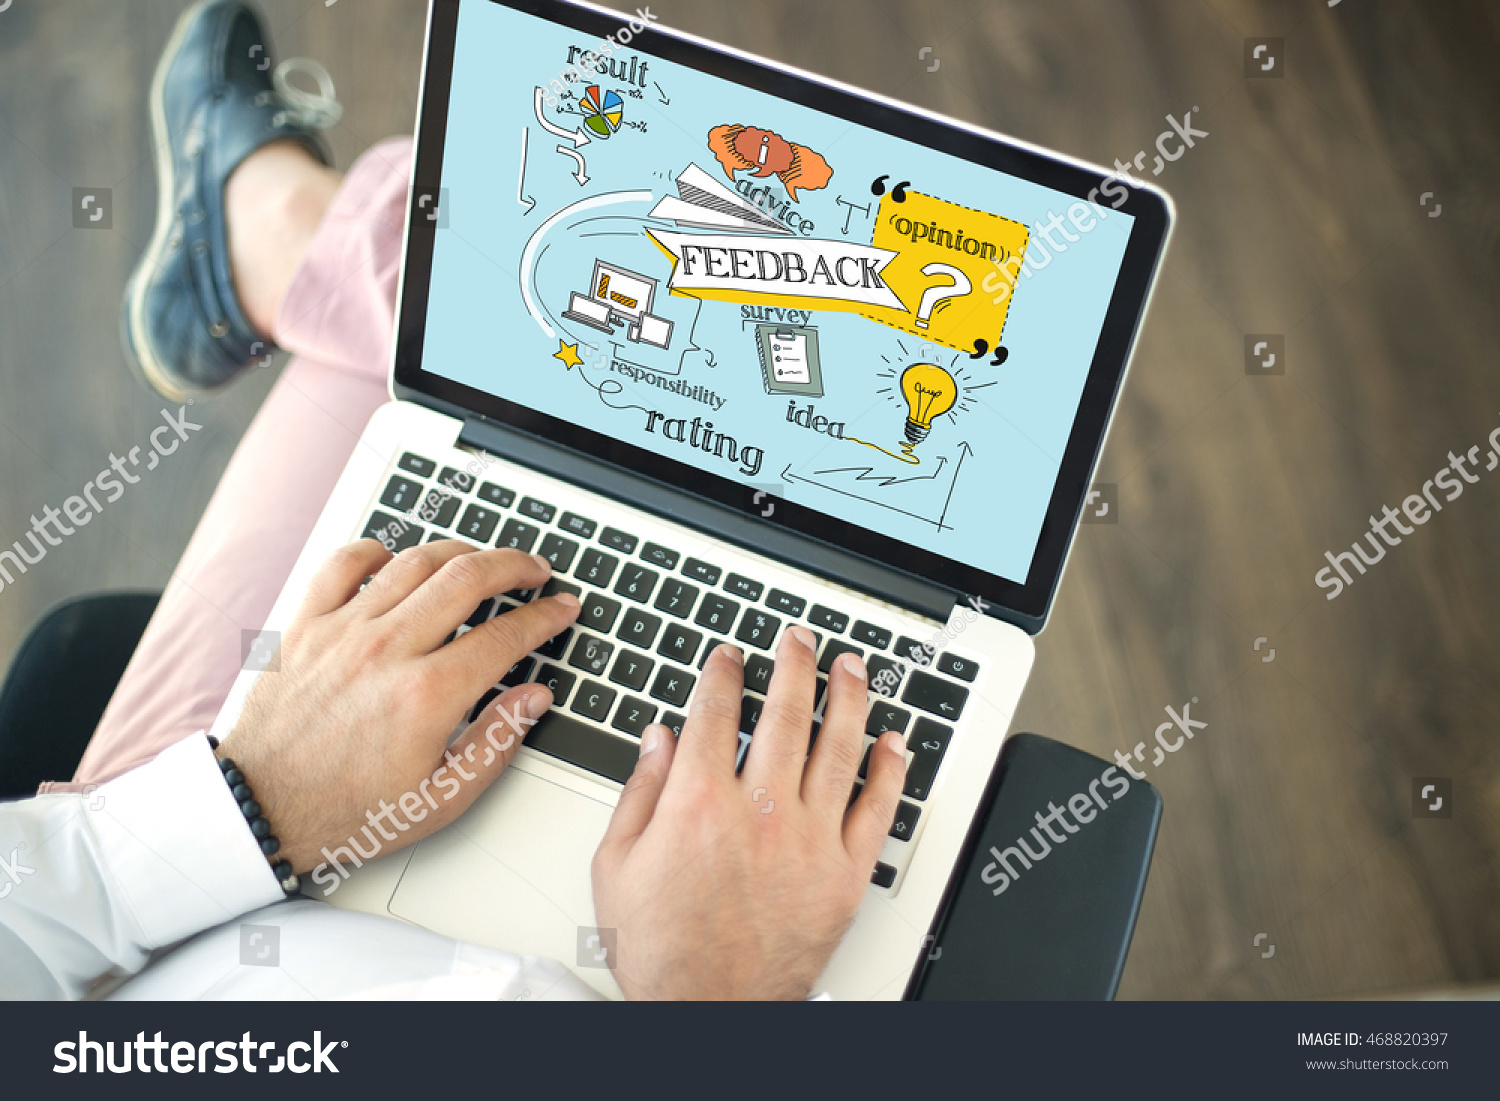 People using laptop and FEEDBACK concept on screen #468820397